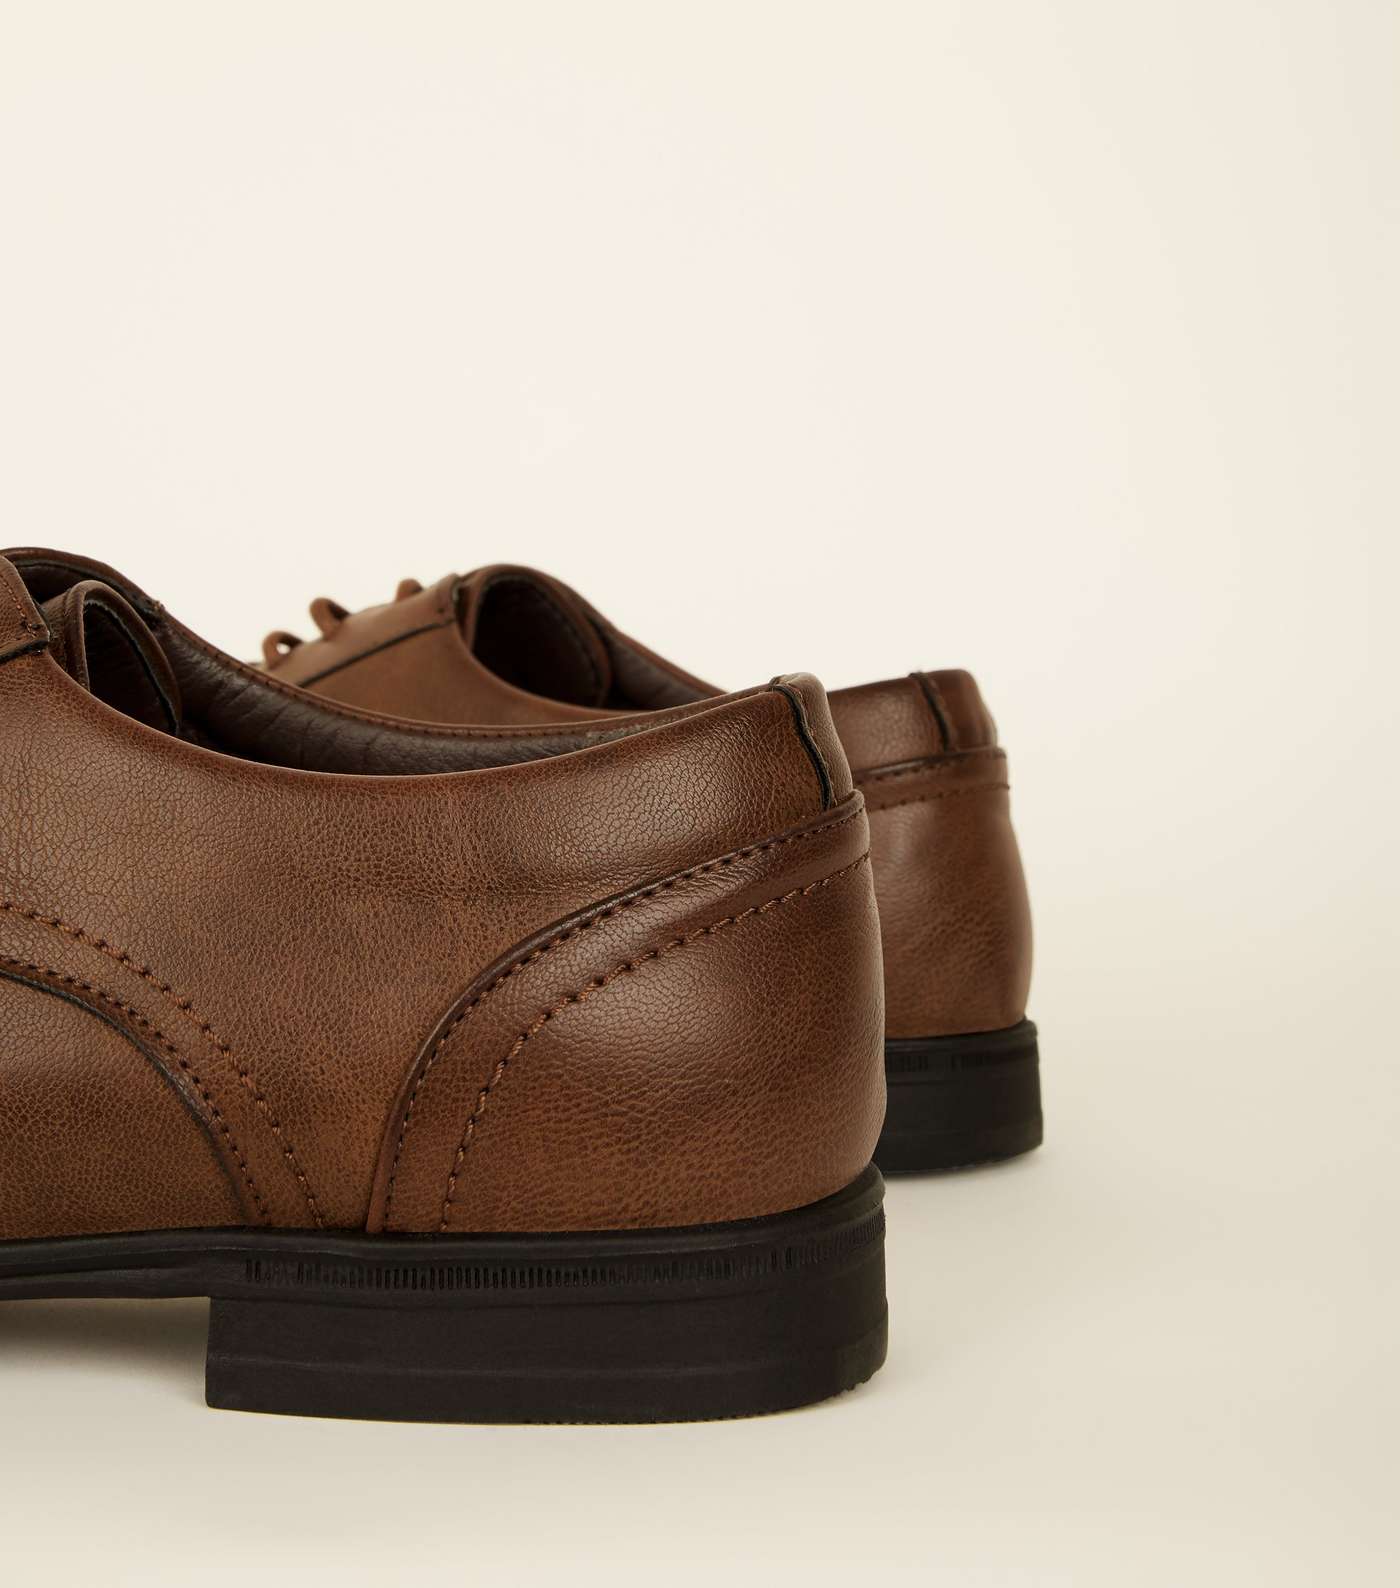 Dark Brown Leather-Look Lace-Up Formal Shoes Image 4